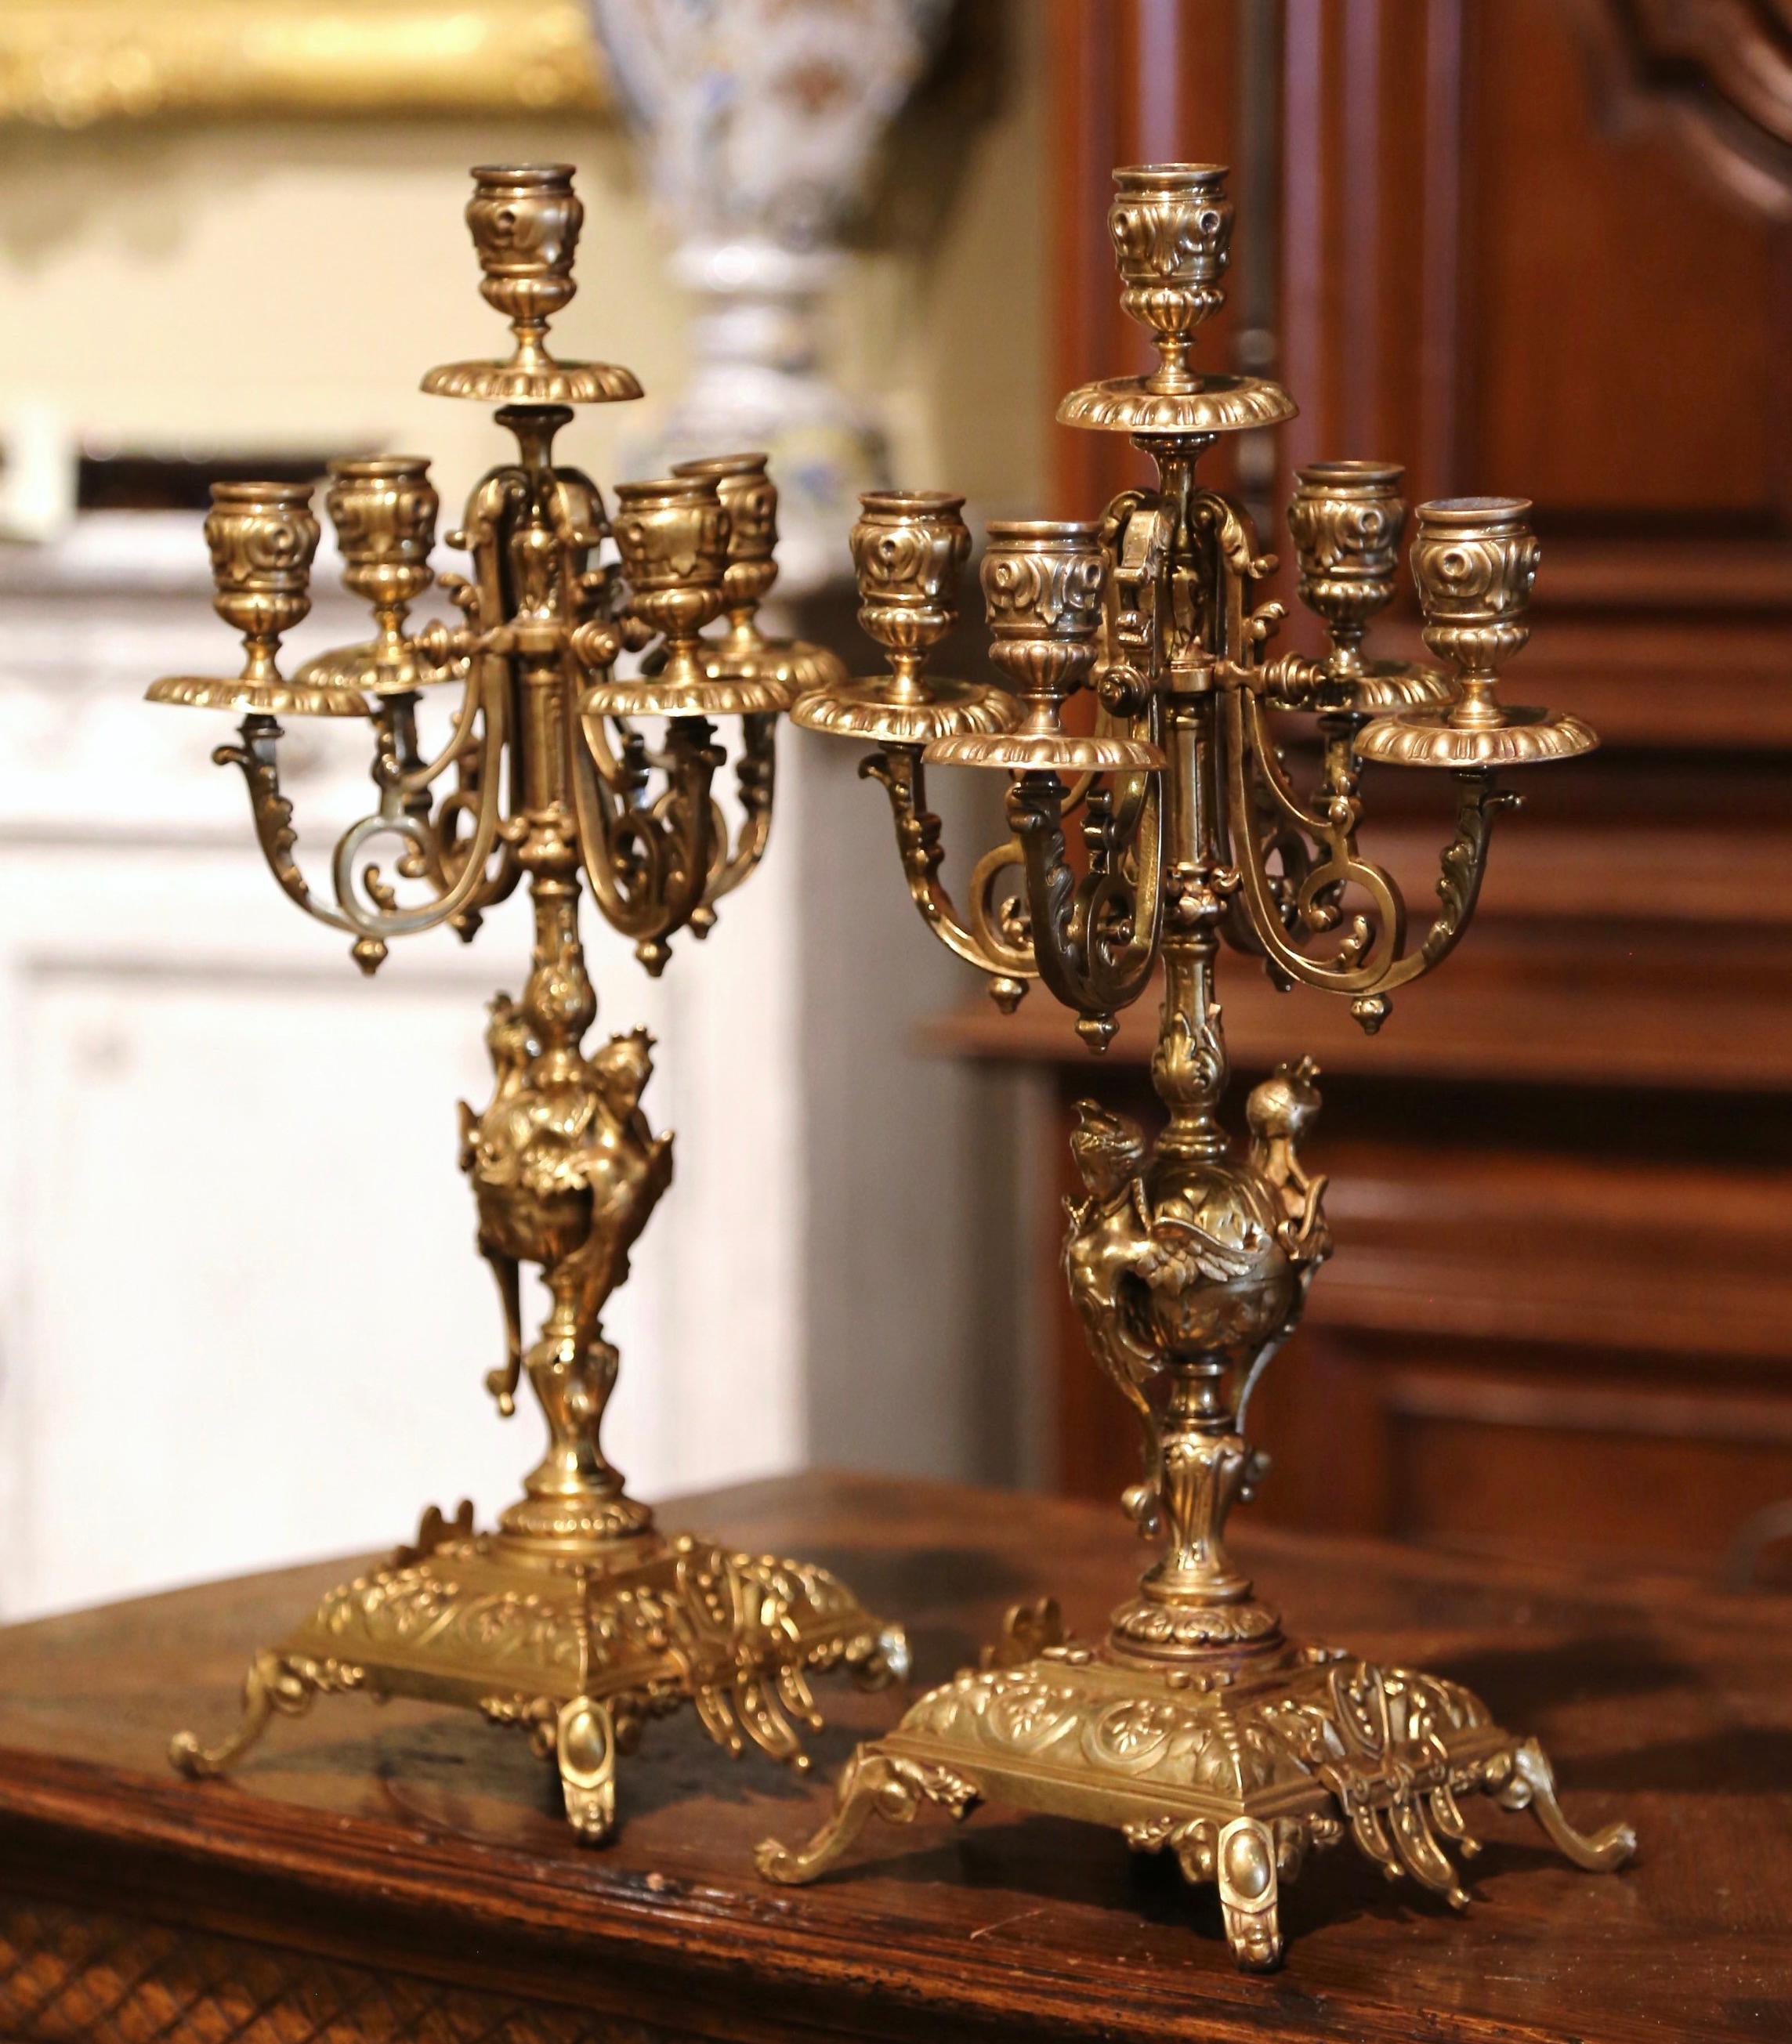 Decorate a mantel or a dining room table with this elegant pair of antique candle holders. Crafted in France circa 1880, each bronze 